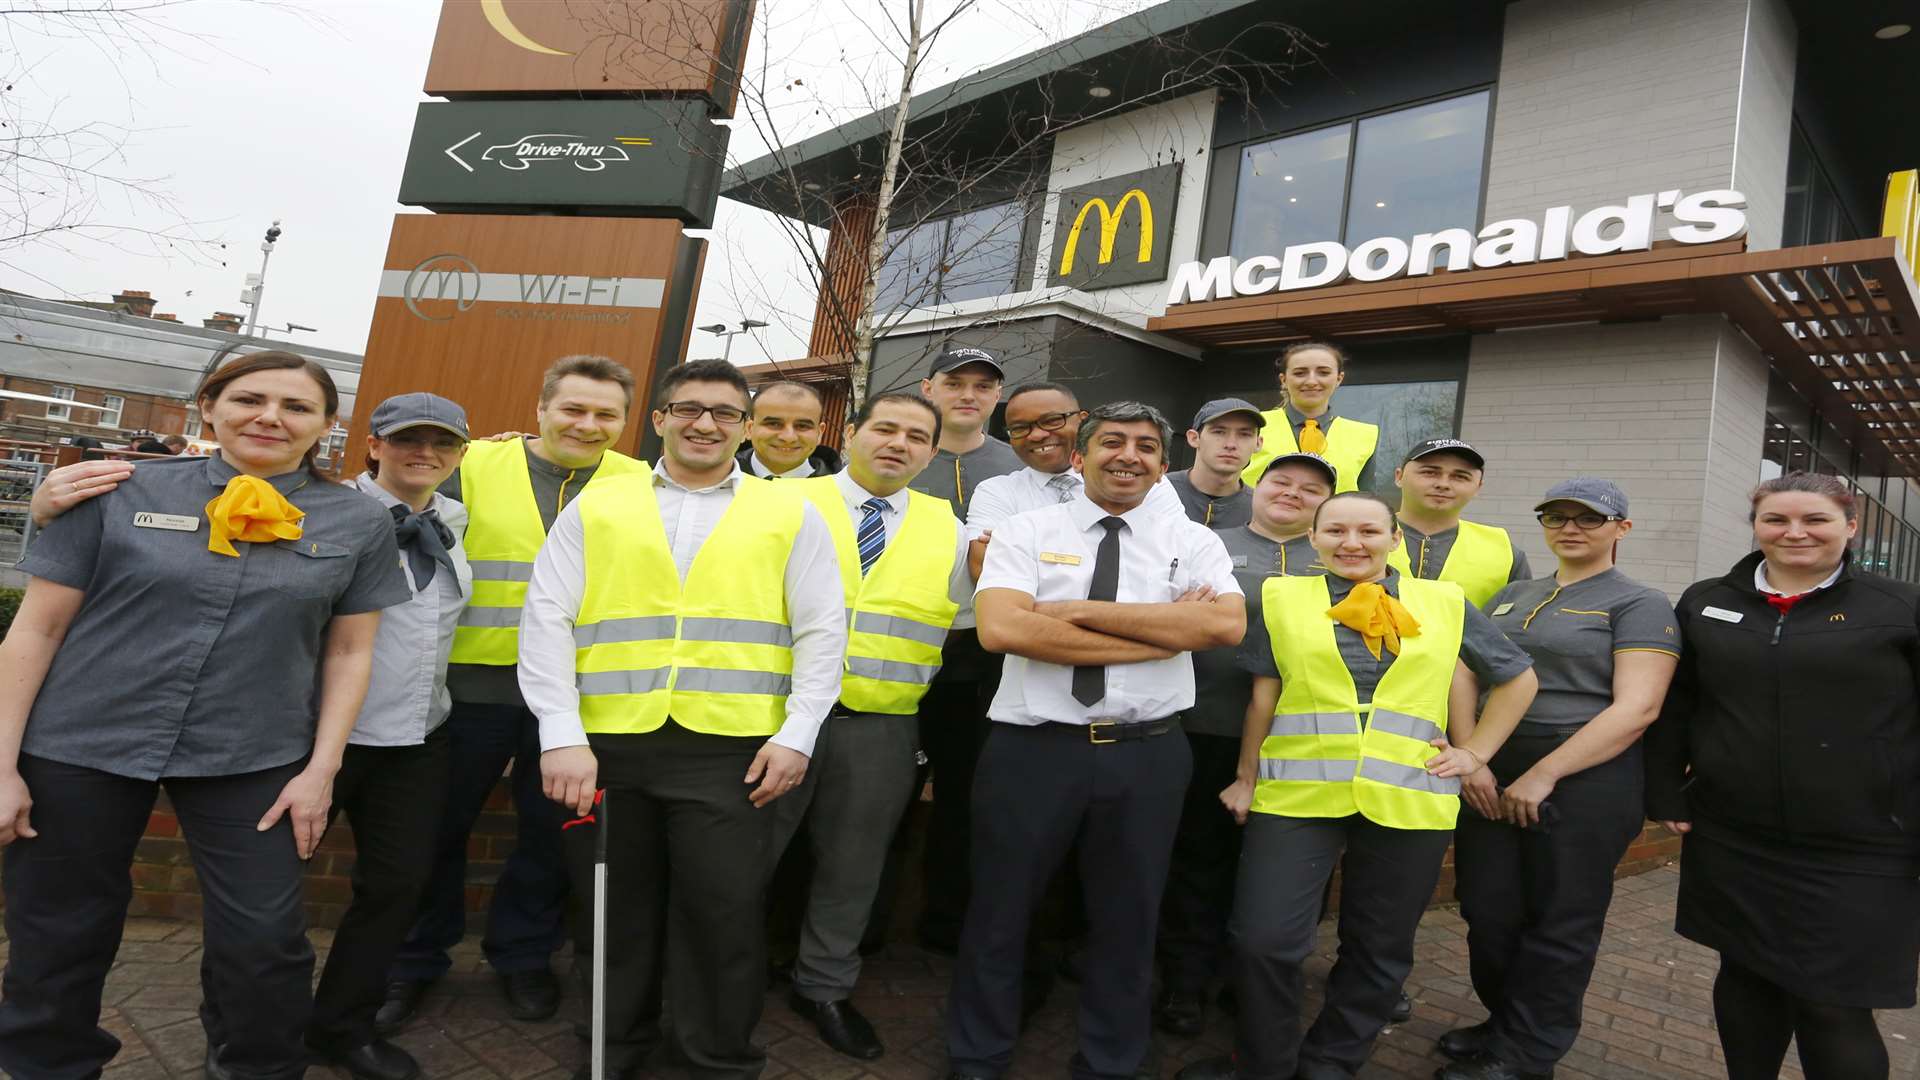 McDonald's staff who are going to be involved in a litter clean up event.